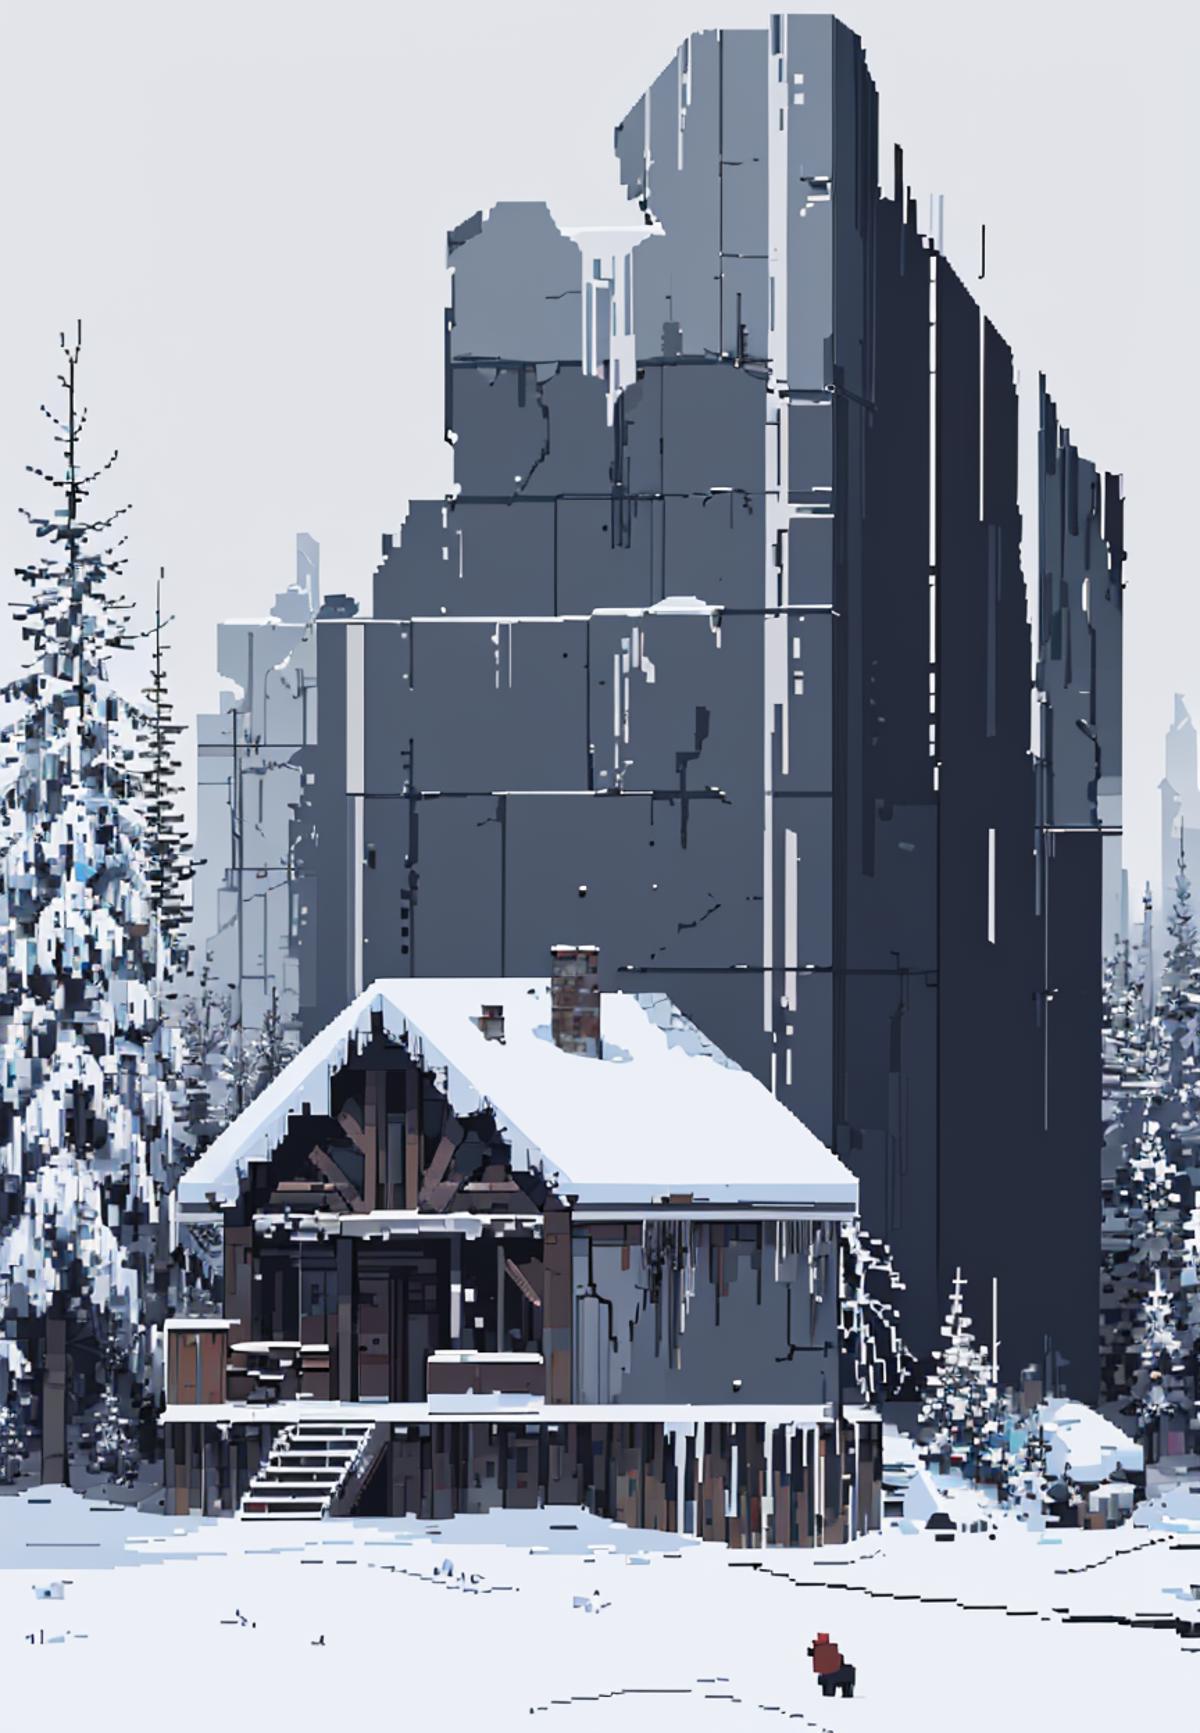 A snow-covered cabin and a tall building in a winter scene.